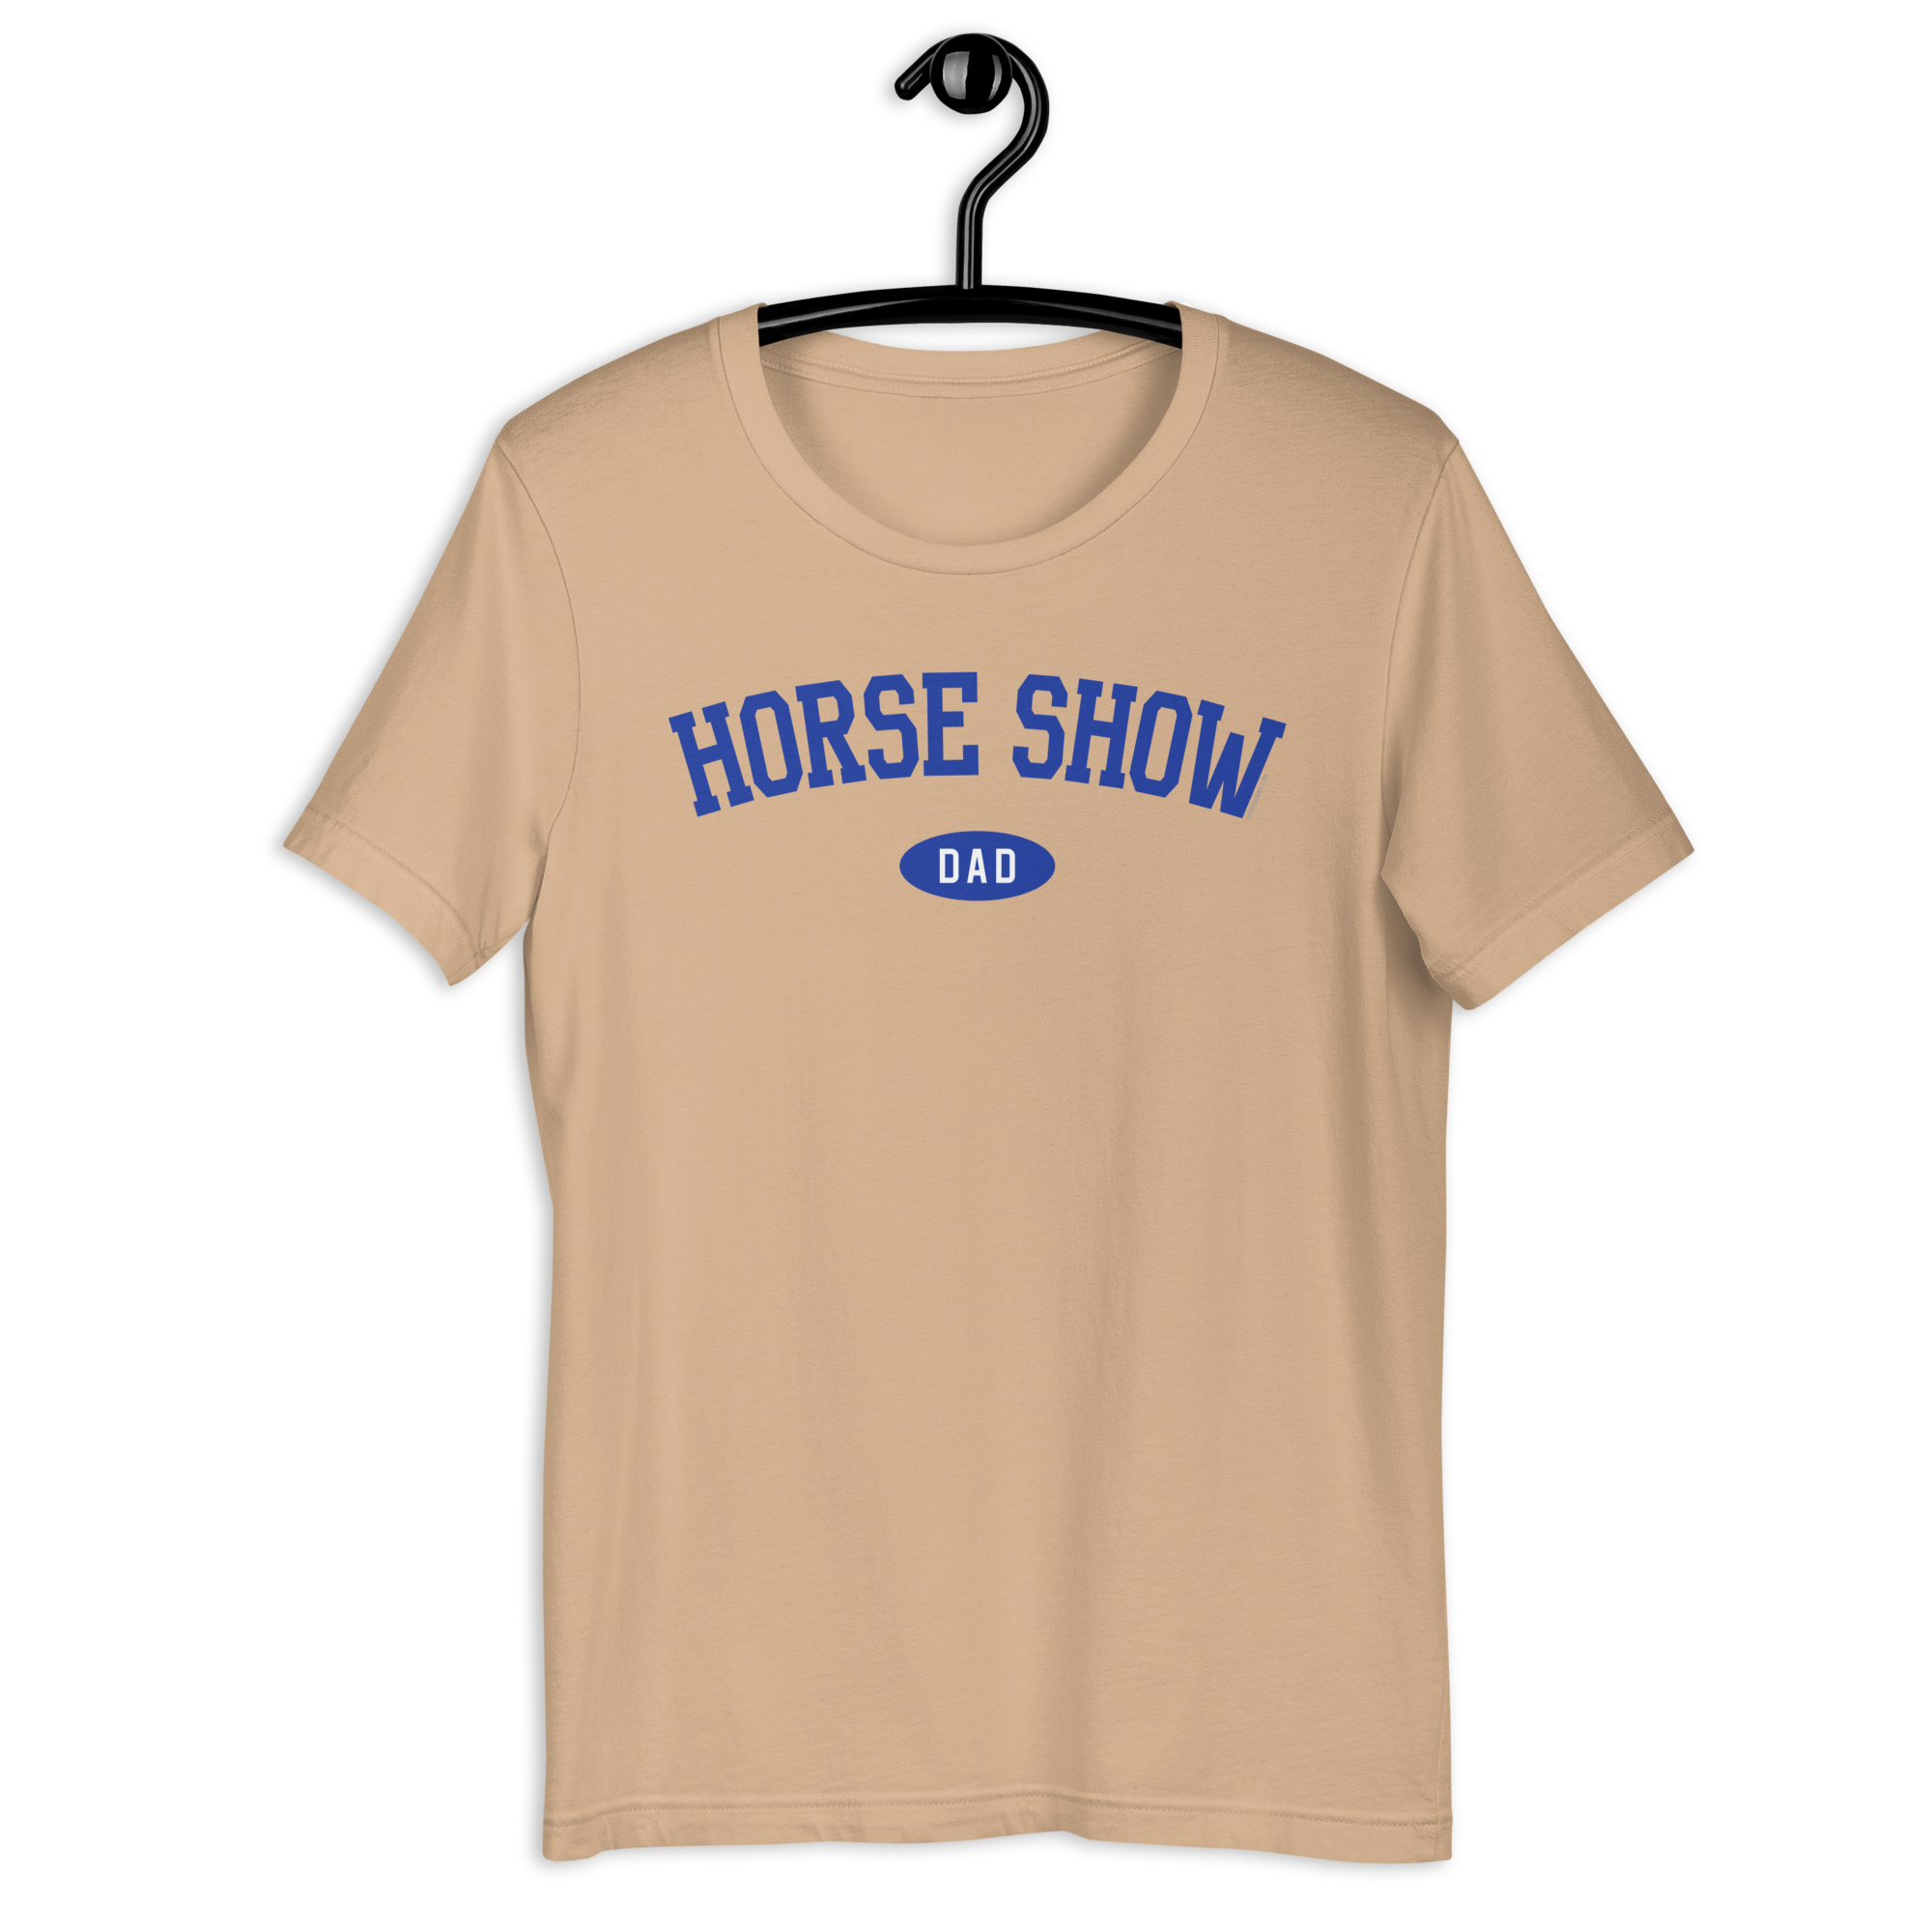 Horse Show Dad Graphic Tee